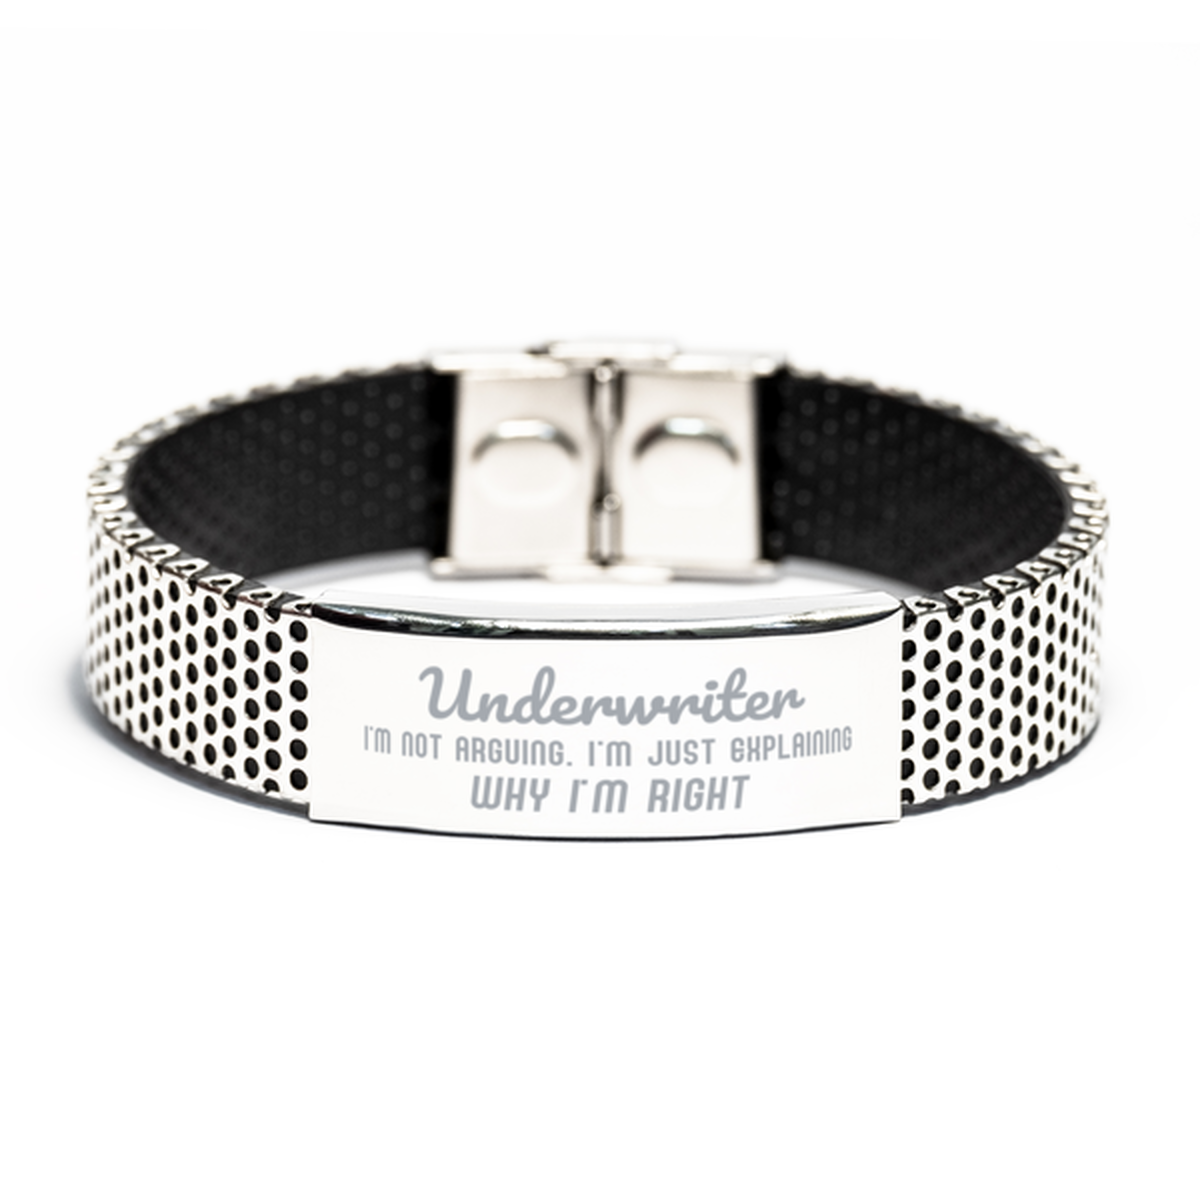 Underwriter I'm not Arguing. I'm Just Explaining Why I'm RIGHT Stainless Steel Bracelet, Funny Saying Quote Underwriter Gifts For Underwriter Graduation Birthday Christmas Gifts for Men Women Coworker